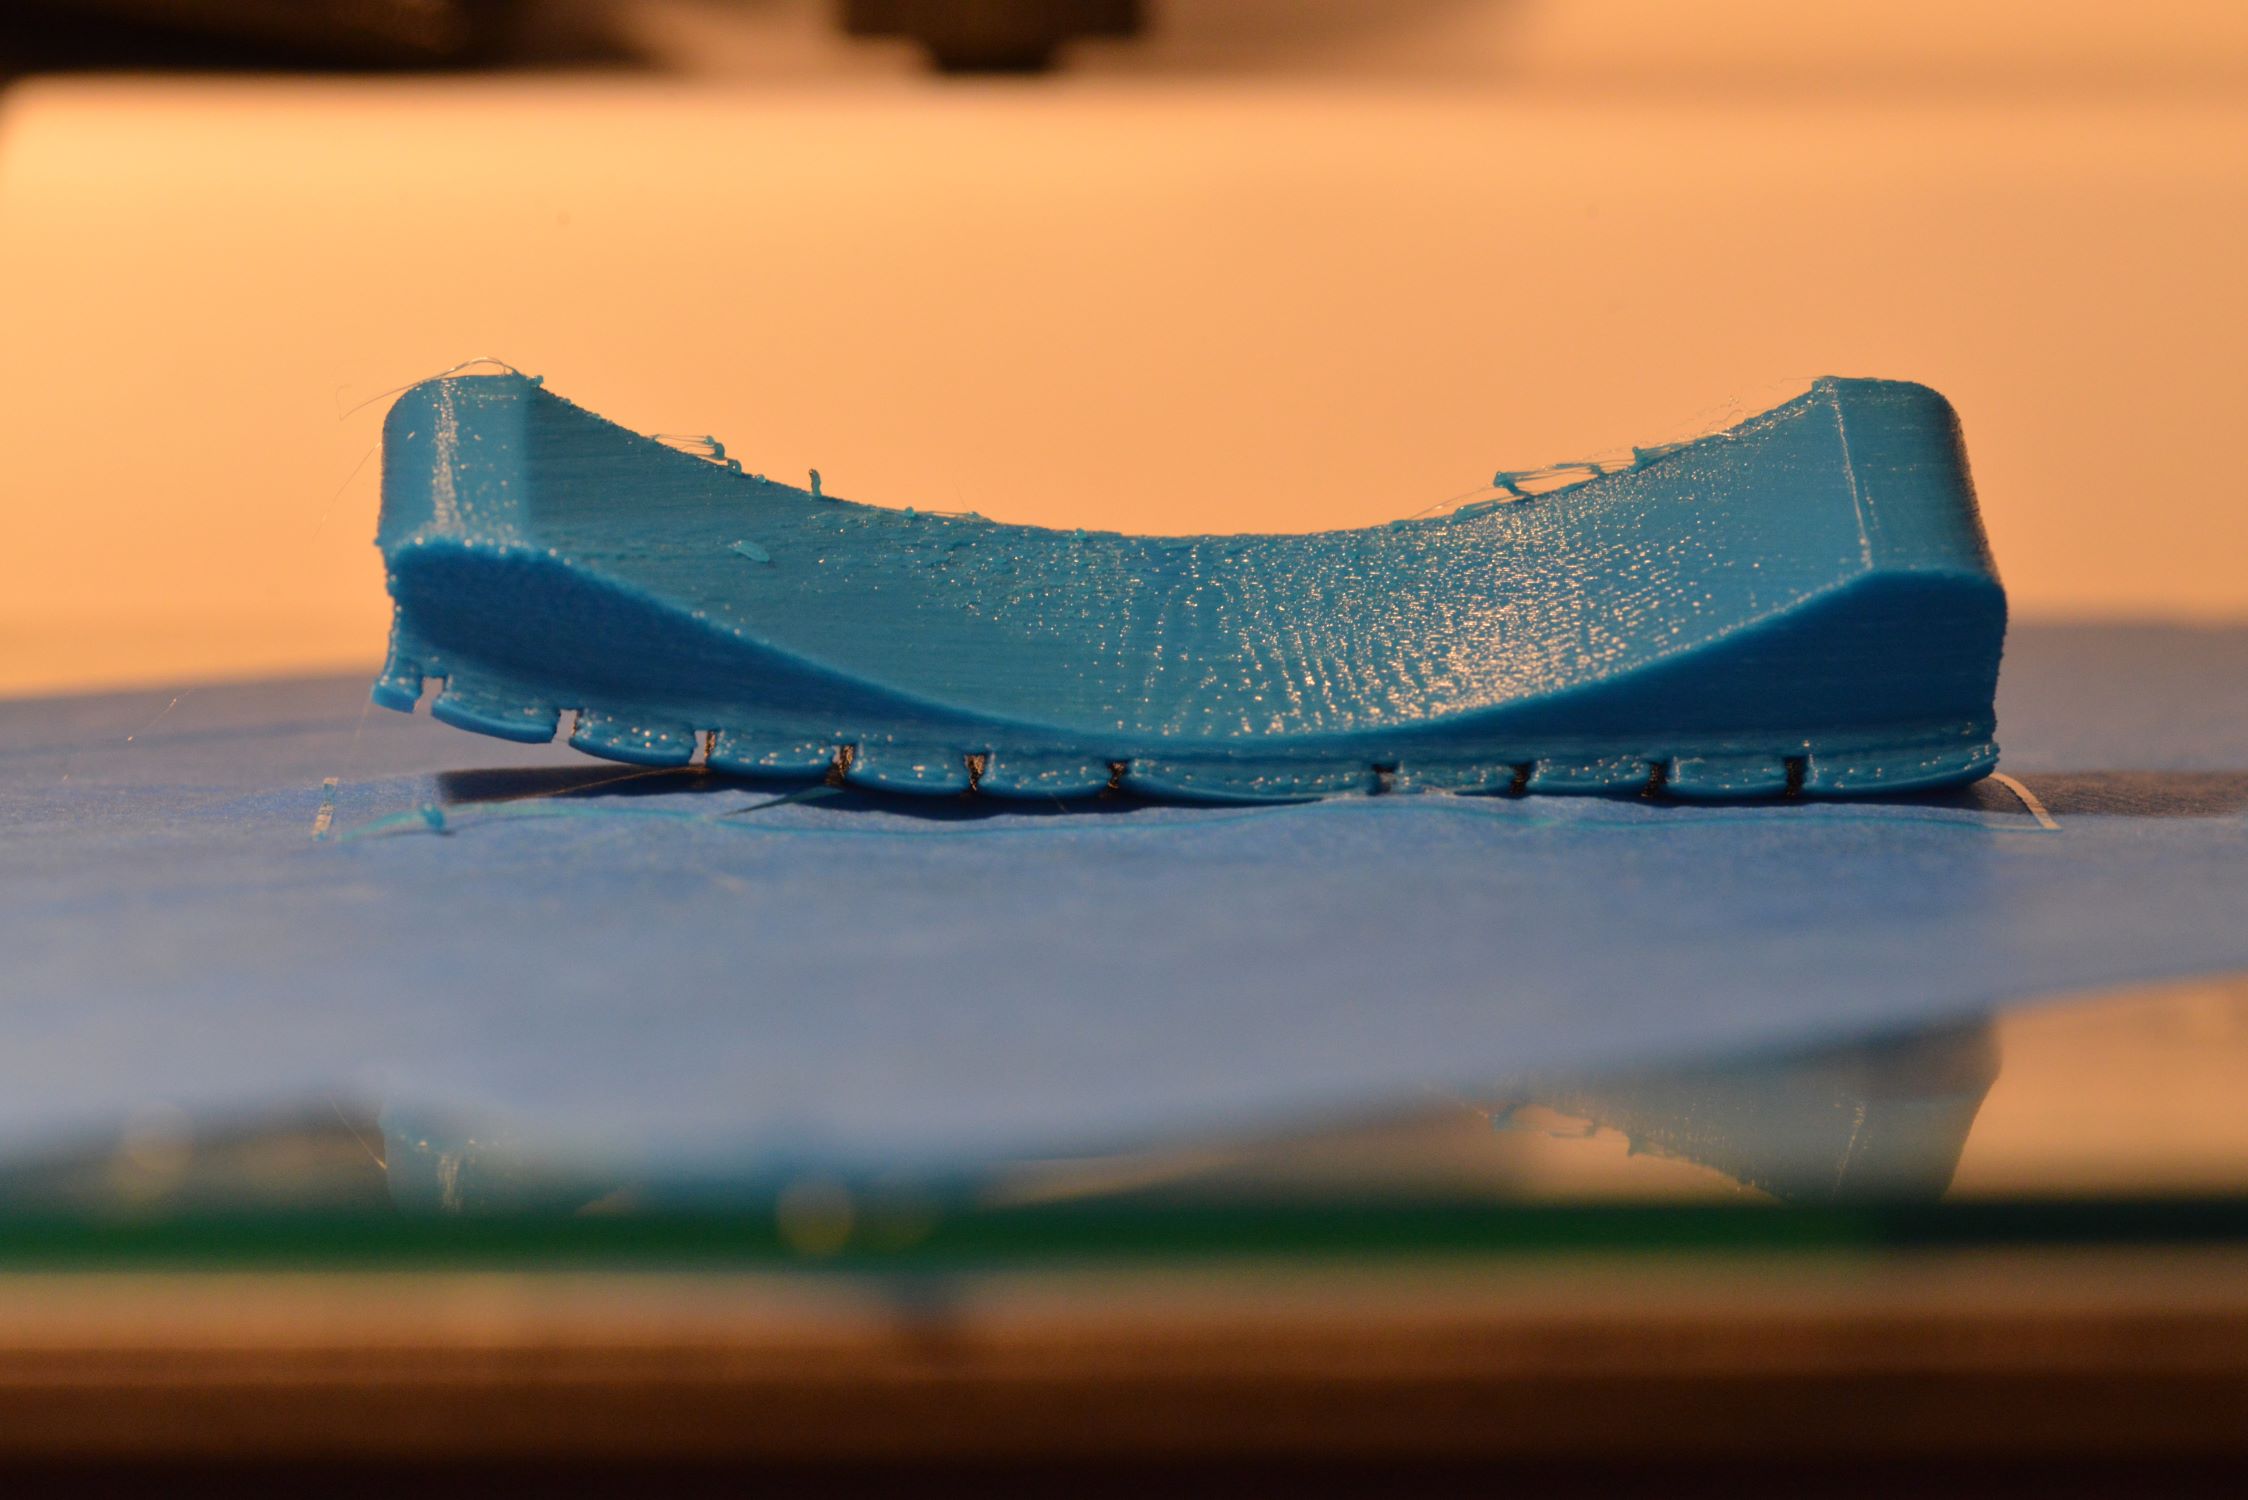 How To Improve Adhesion In A 3D Printer